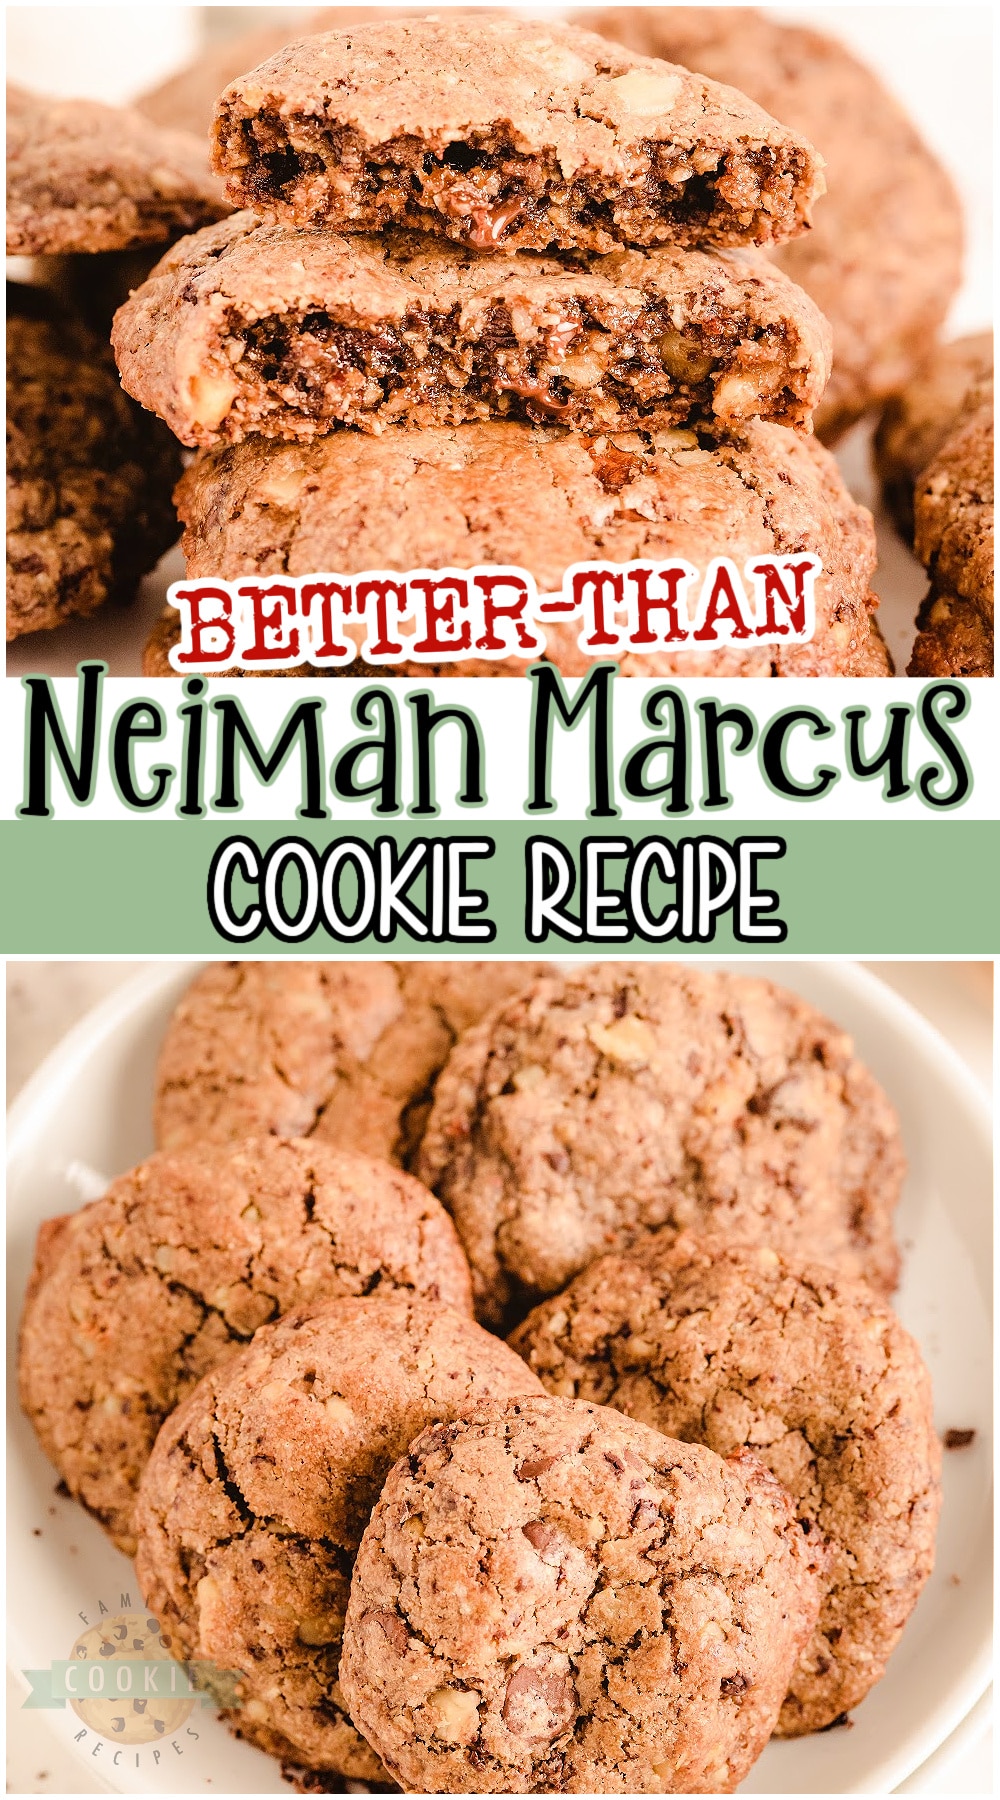 "Better Than" Neiman Marcus Cookies are fabulous oatmeal chocolate chip cookies made with grated chocolate! Thick & chewy oatmeal cookie recipe with great chocolate flavor that everyone loves! And bonus- the recipe is FREE! #cookies #chocolate #oatmeal #NeimanMarcus #easyrecipe from FAMILY COOKIE RECIPES via @buttergirls